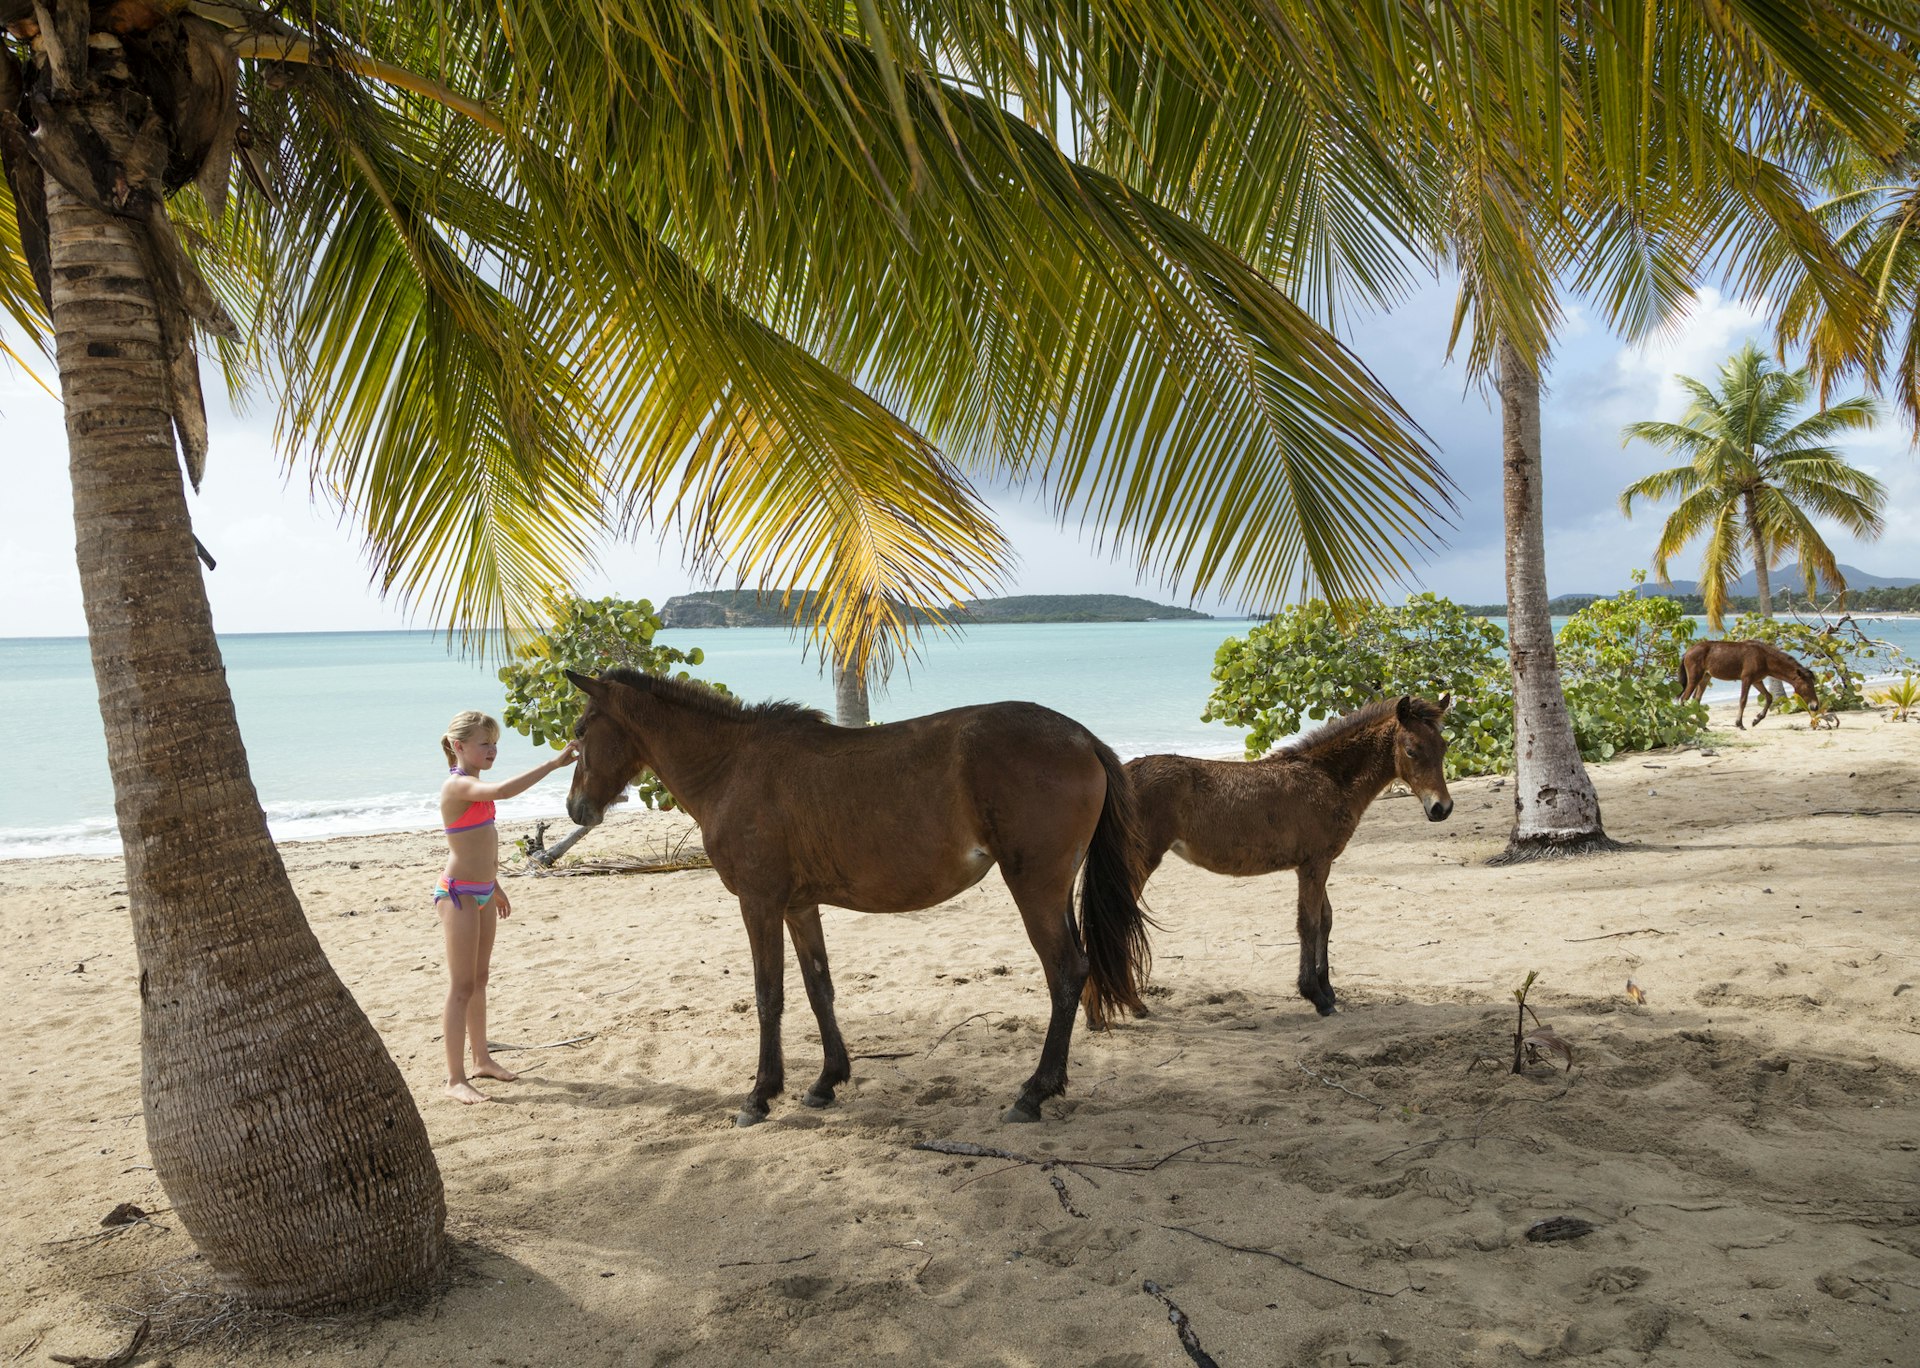 A young girl petting horses on the beach in Puerto Rico